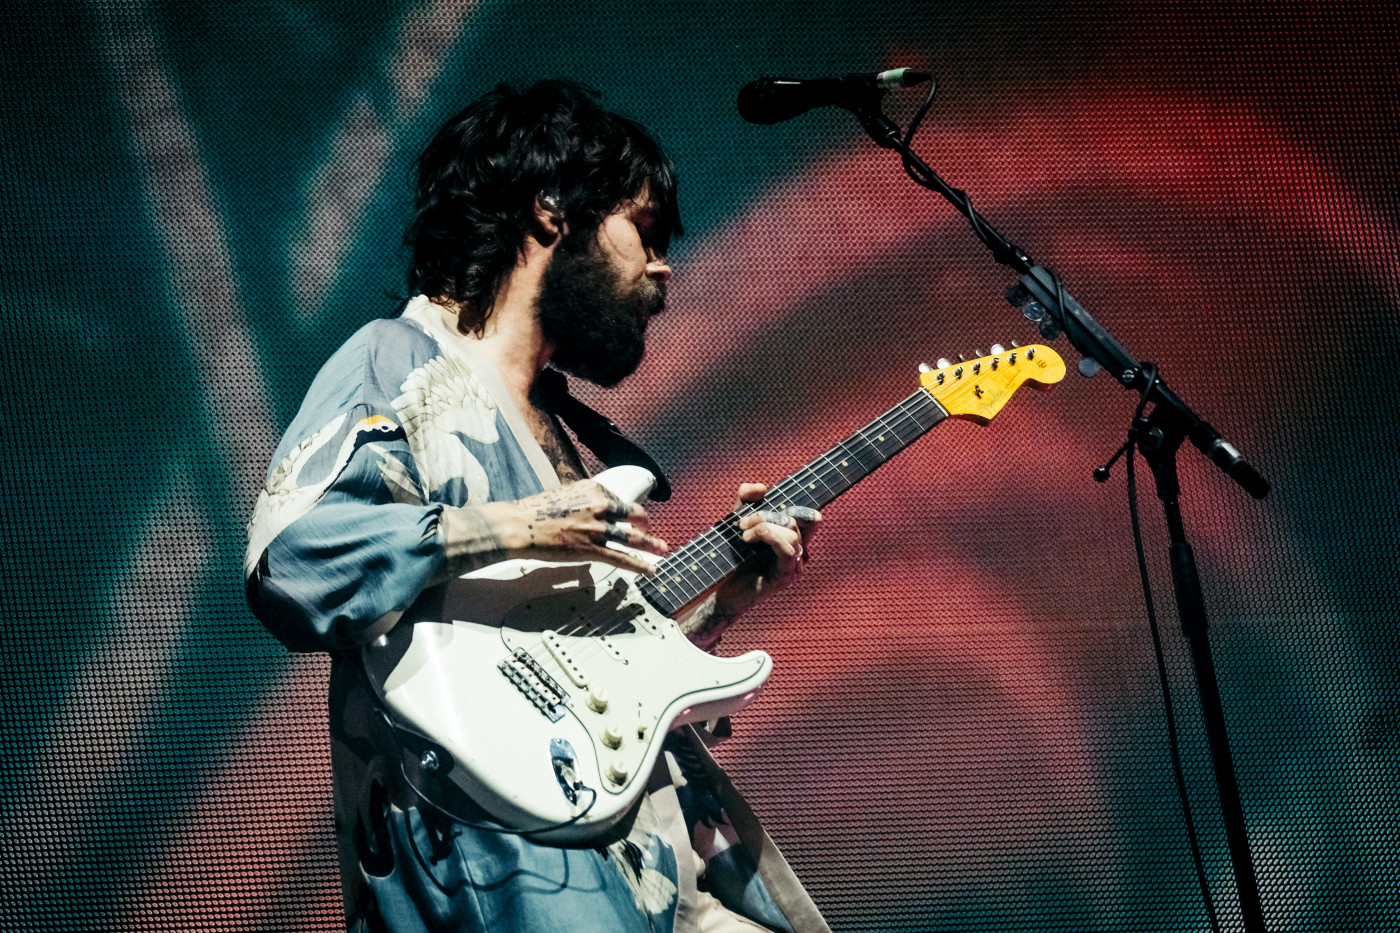 Biffy Clyro perform at Glasgow Green on 9th September 2021